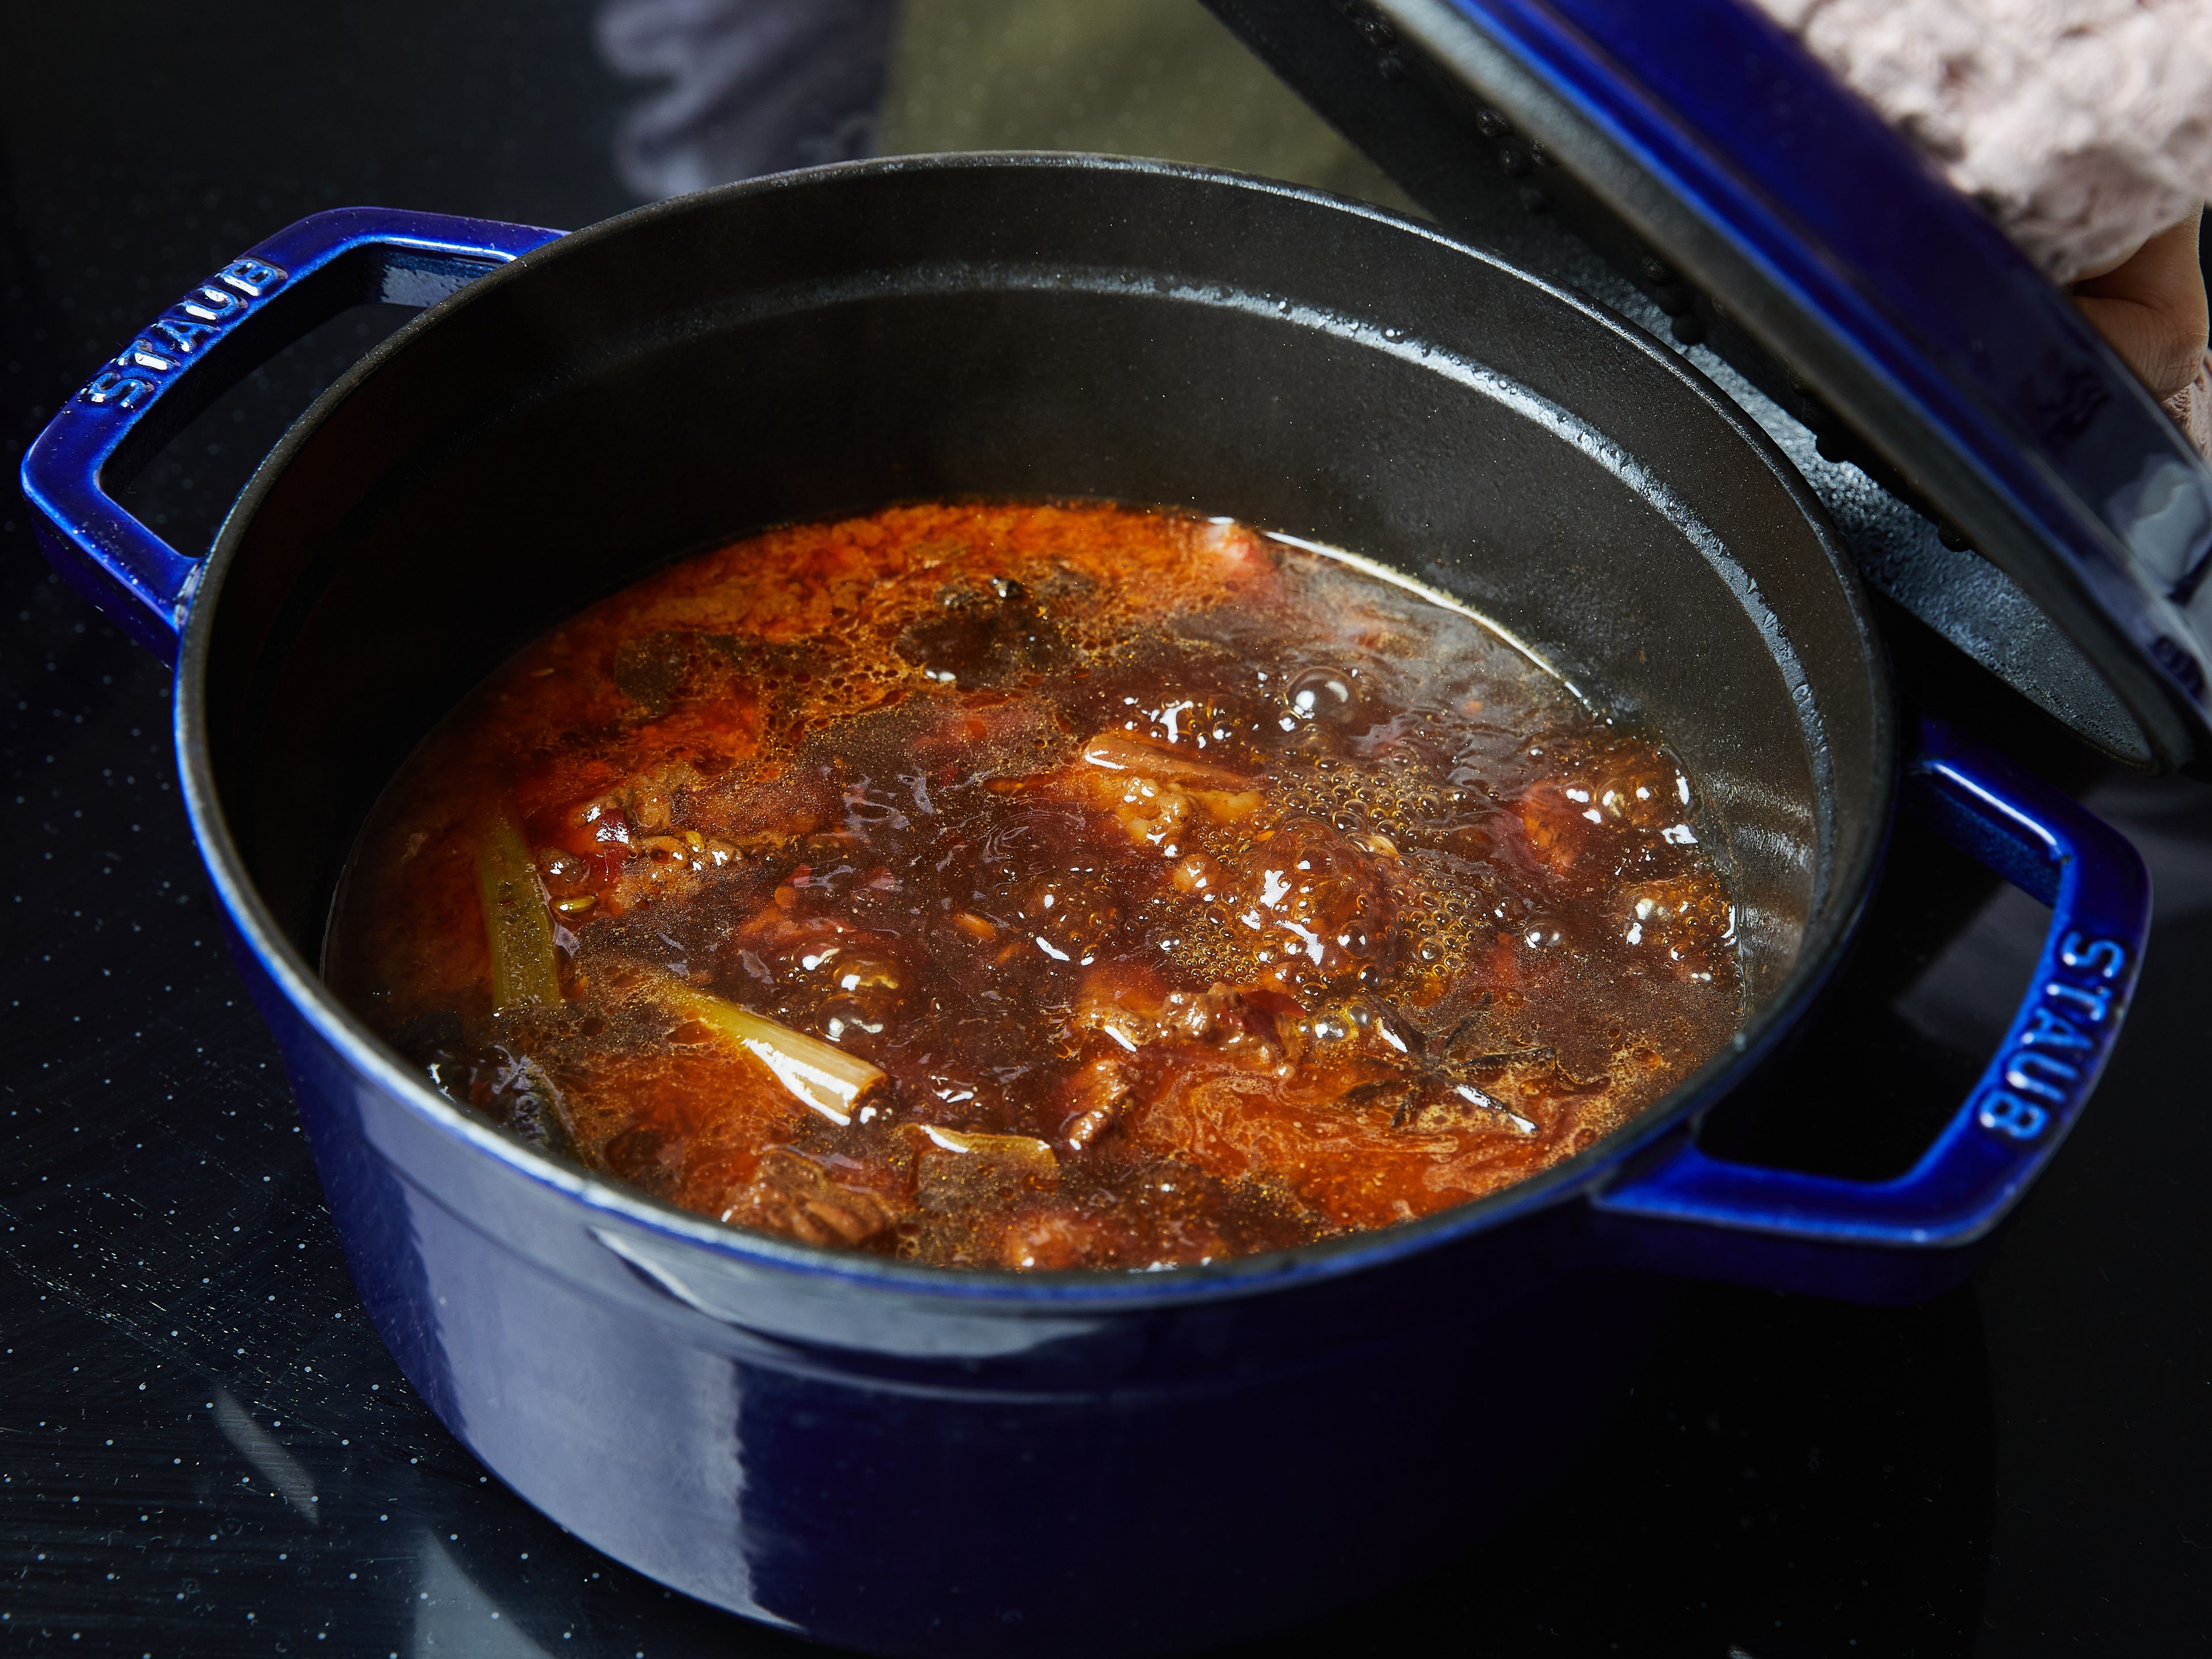 Add the stock and the water to the pot and bring it to a simmer. Cook the beef with the lid on, over medium-low heat, stew for at least 45 min., or until the soup has reduced, and the beef is soft. You can also cook longer for up to 2 hr. for a more tender meat.